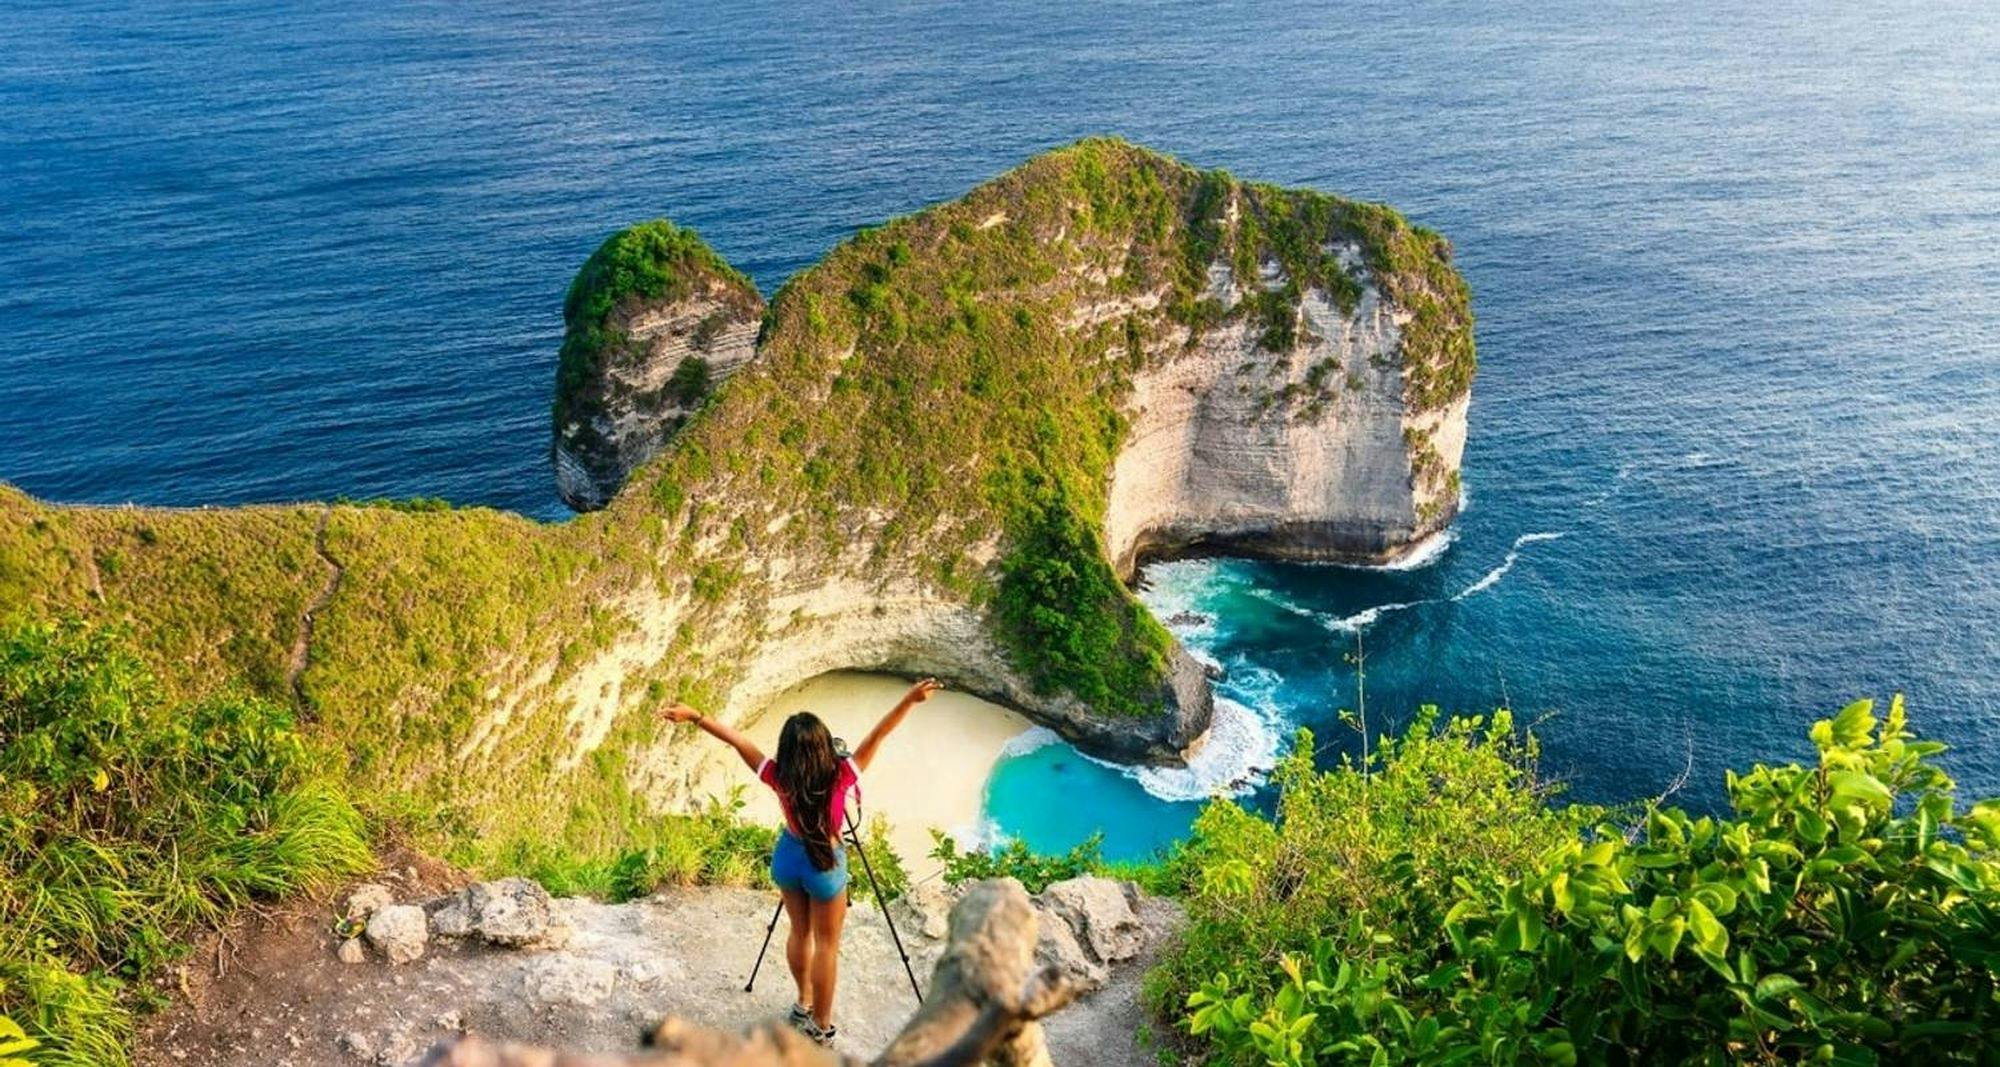 The Best of Bali, Gilis and Nusa Penida Island in 10 Days